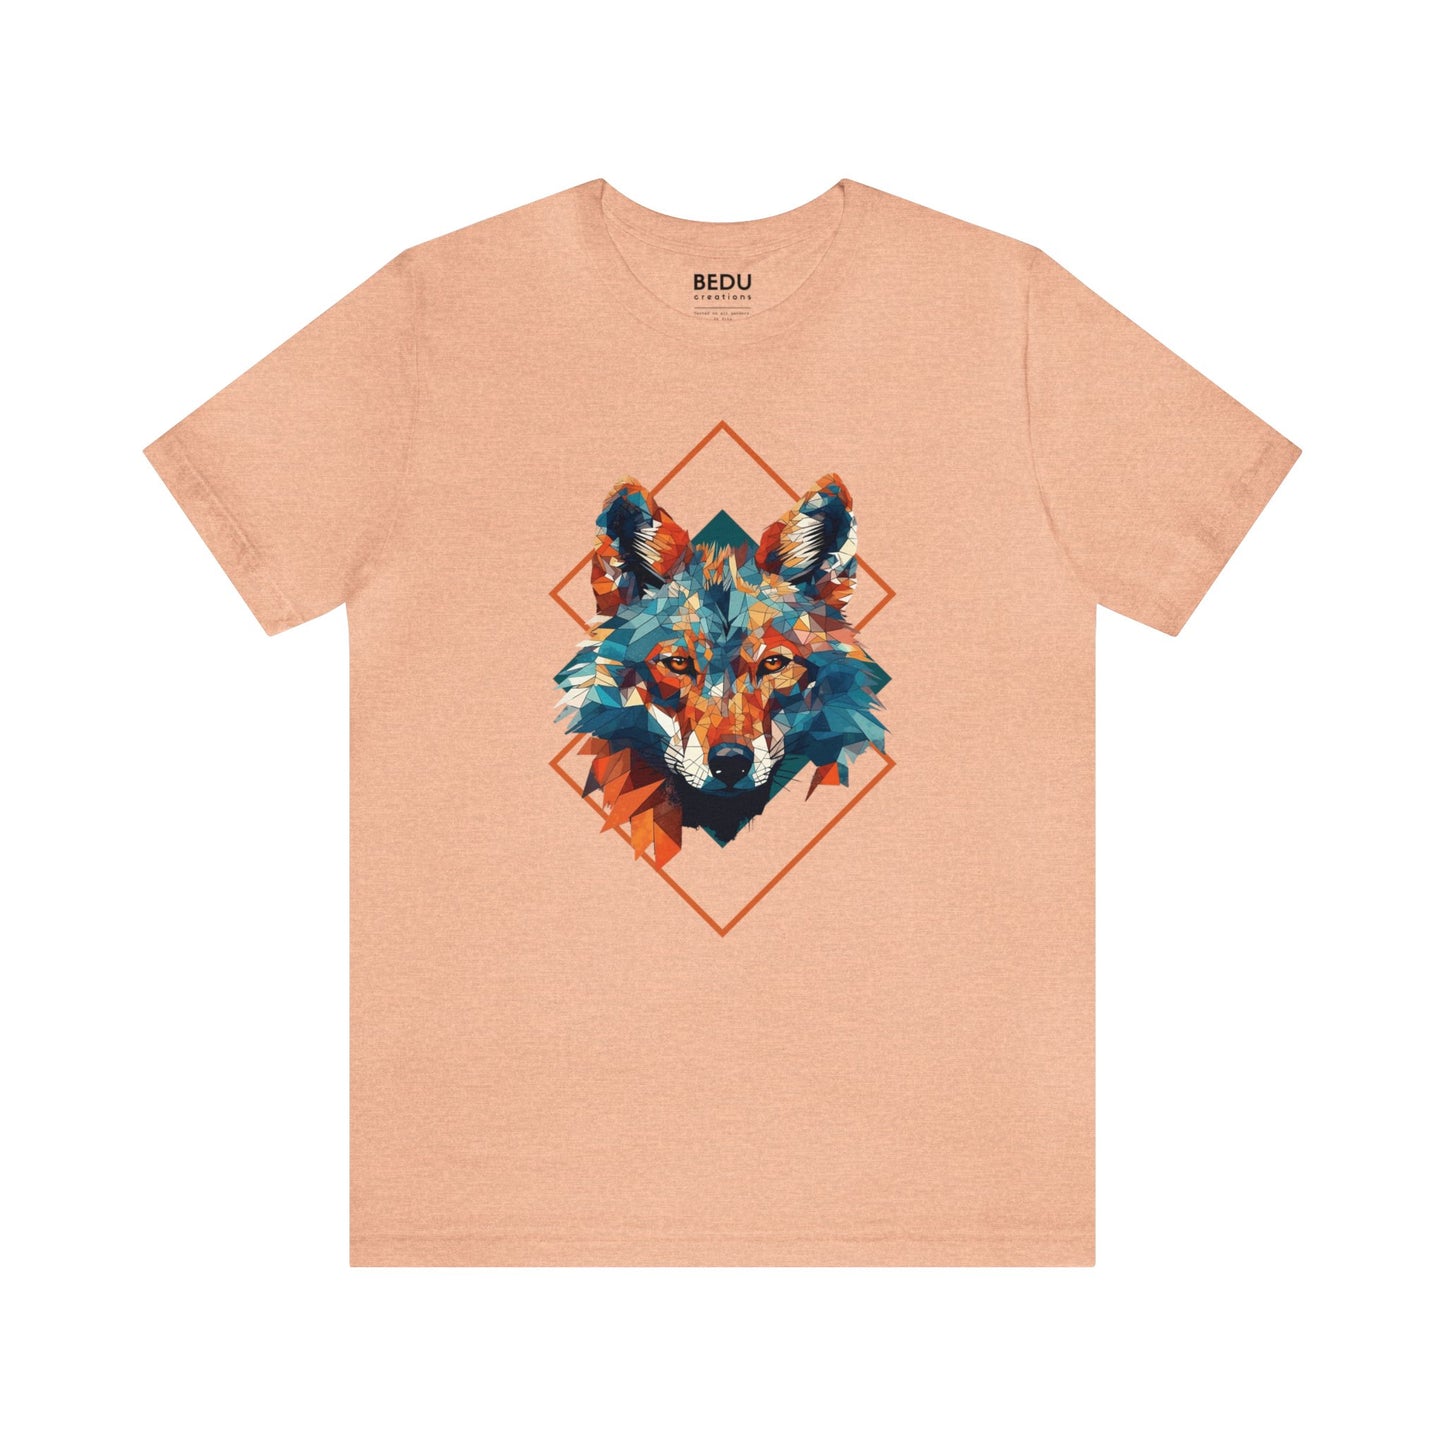 Majestic Geometric Wolf Head T-Shirt for Wolf Lovers with Turquoise, Orange, and Triangular Shapes